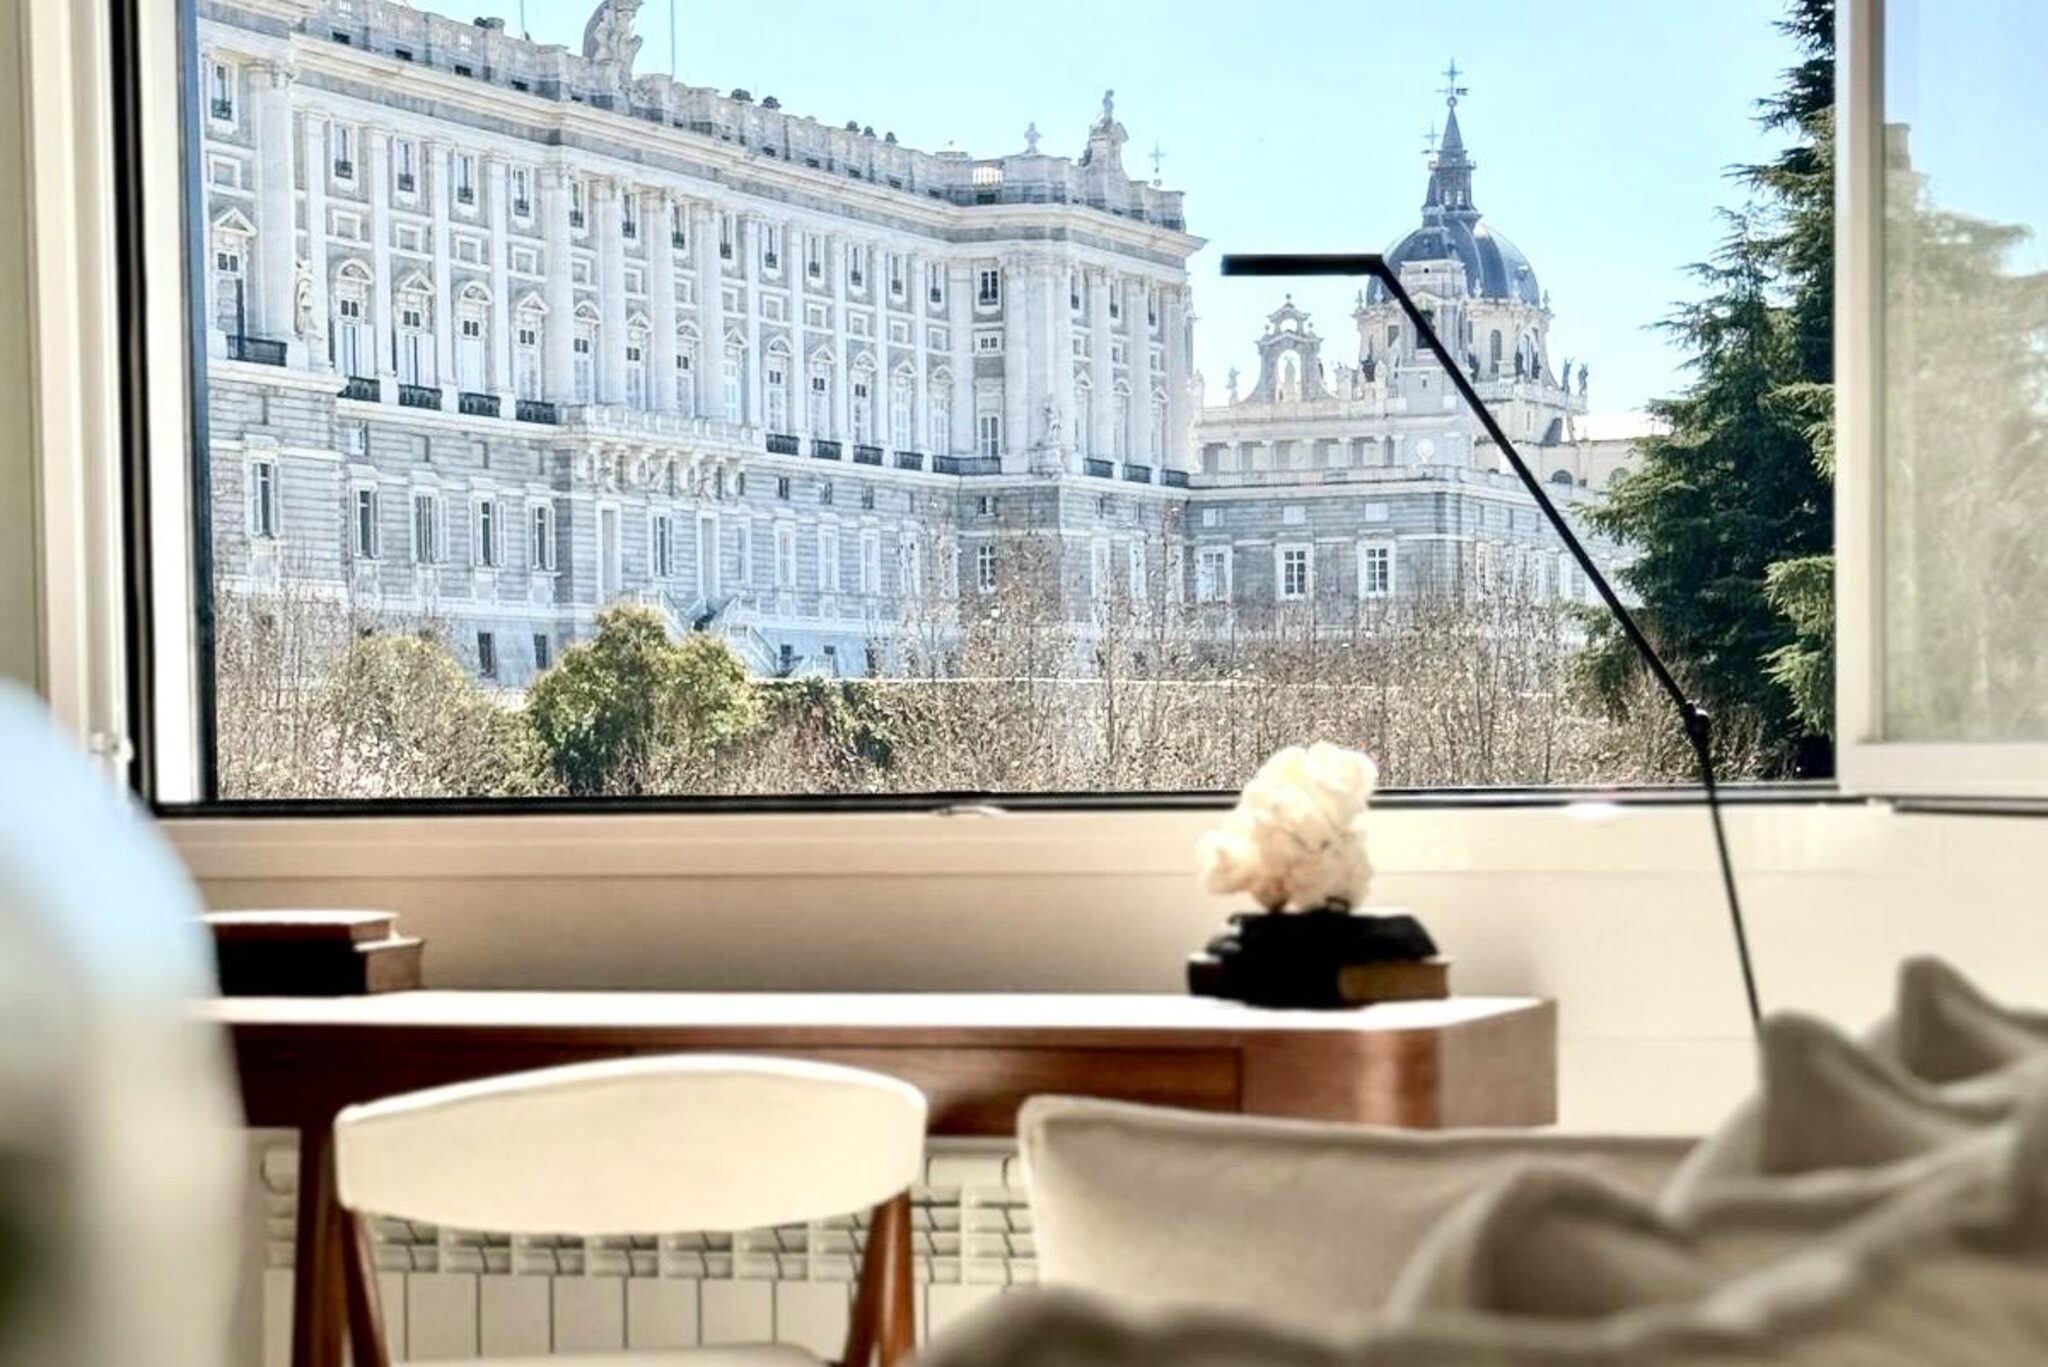 The best views of the Royal Palace of Madrid